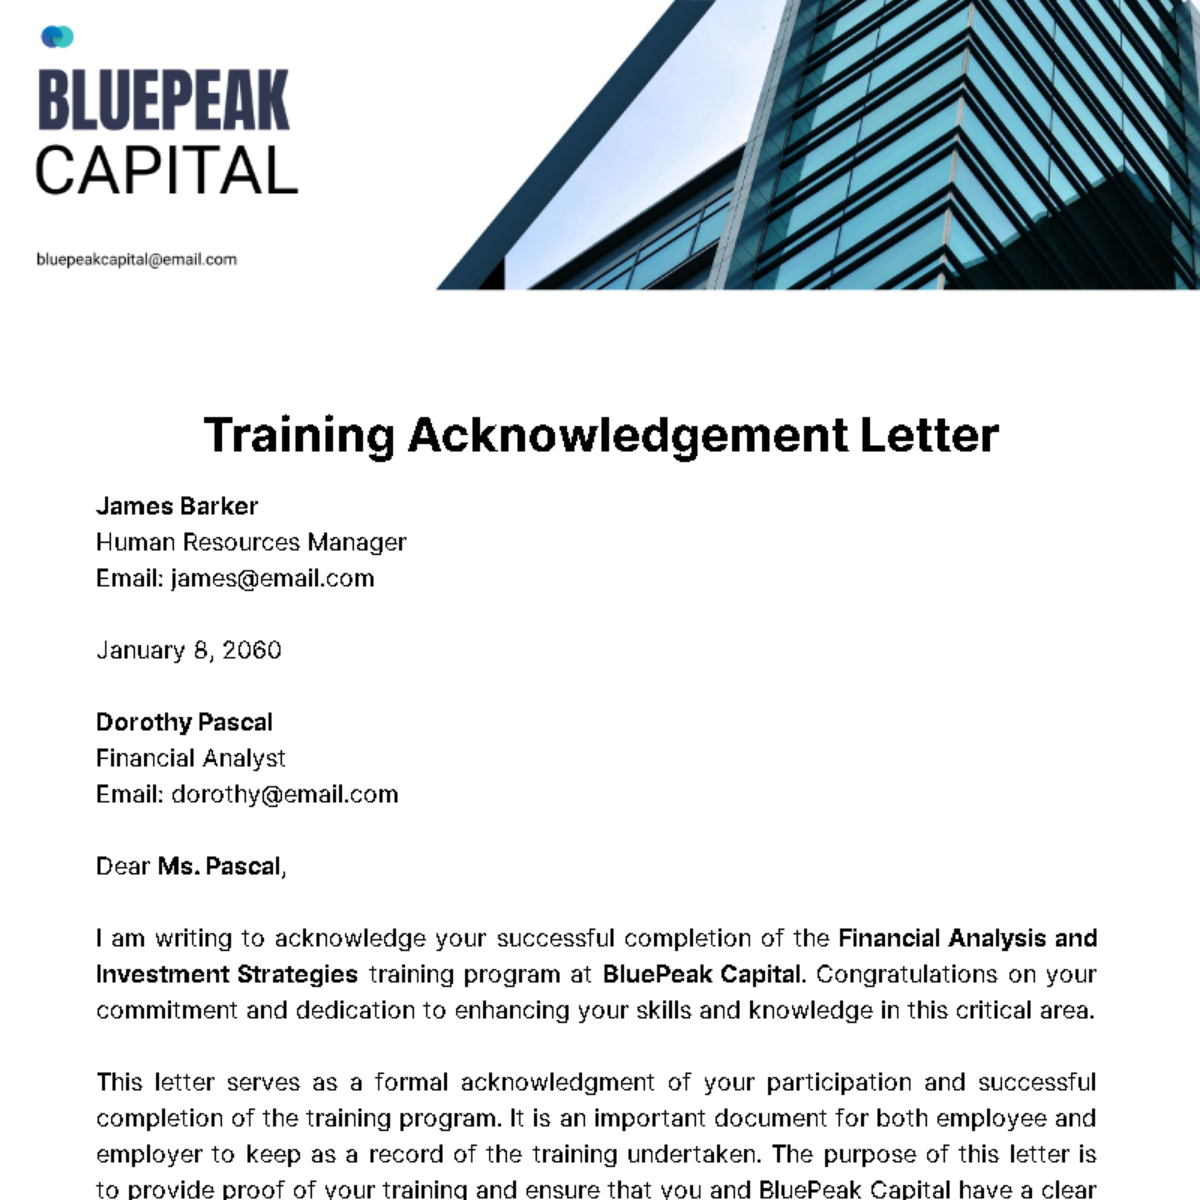 Training Acknowledgement Letter Template